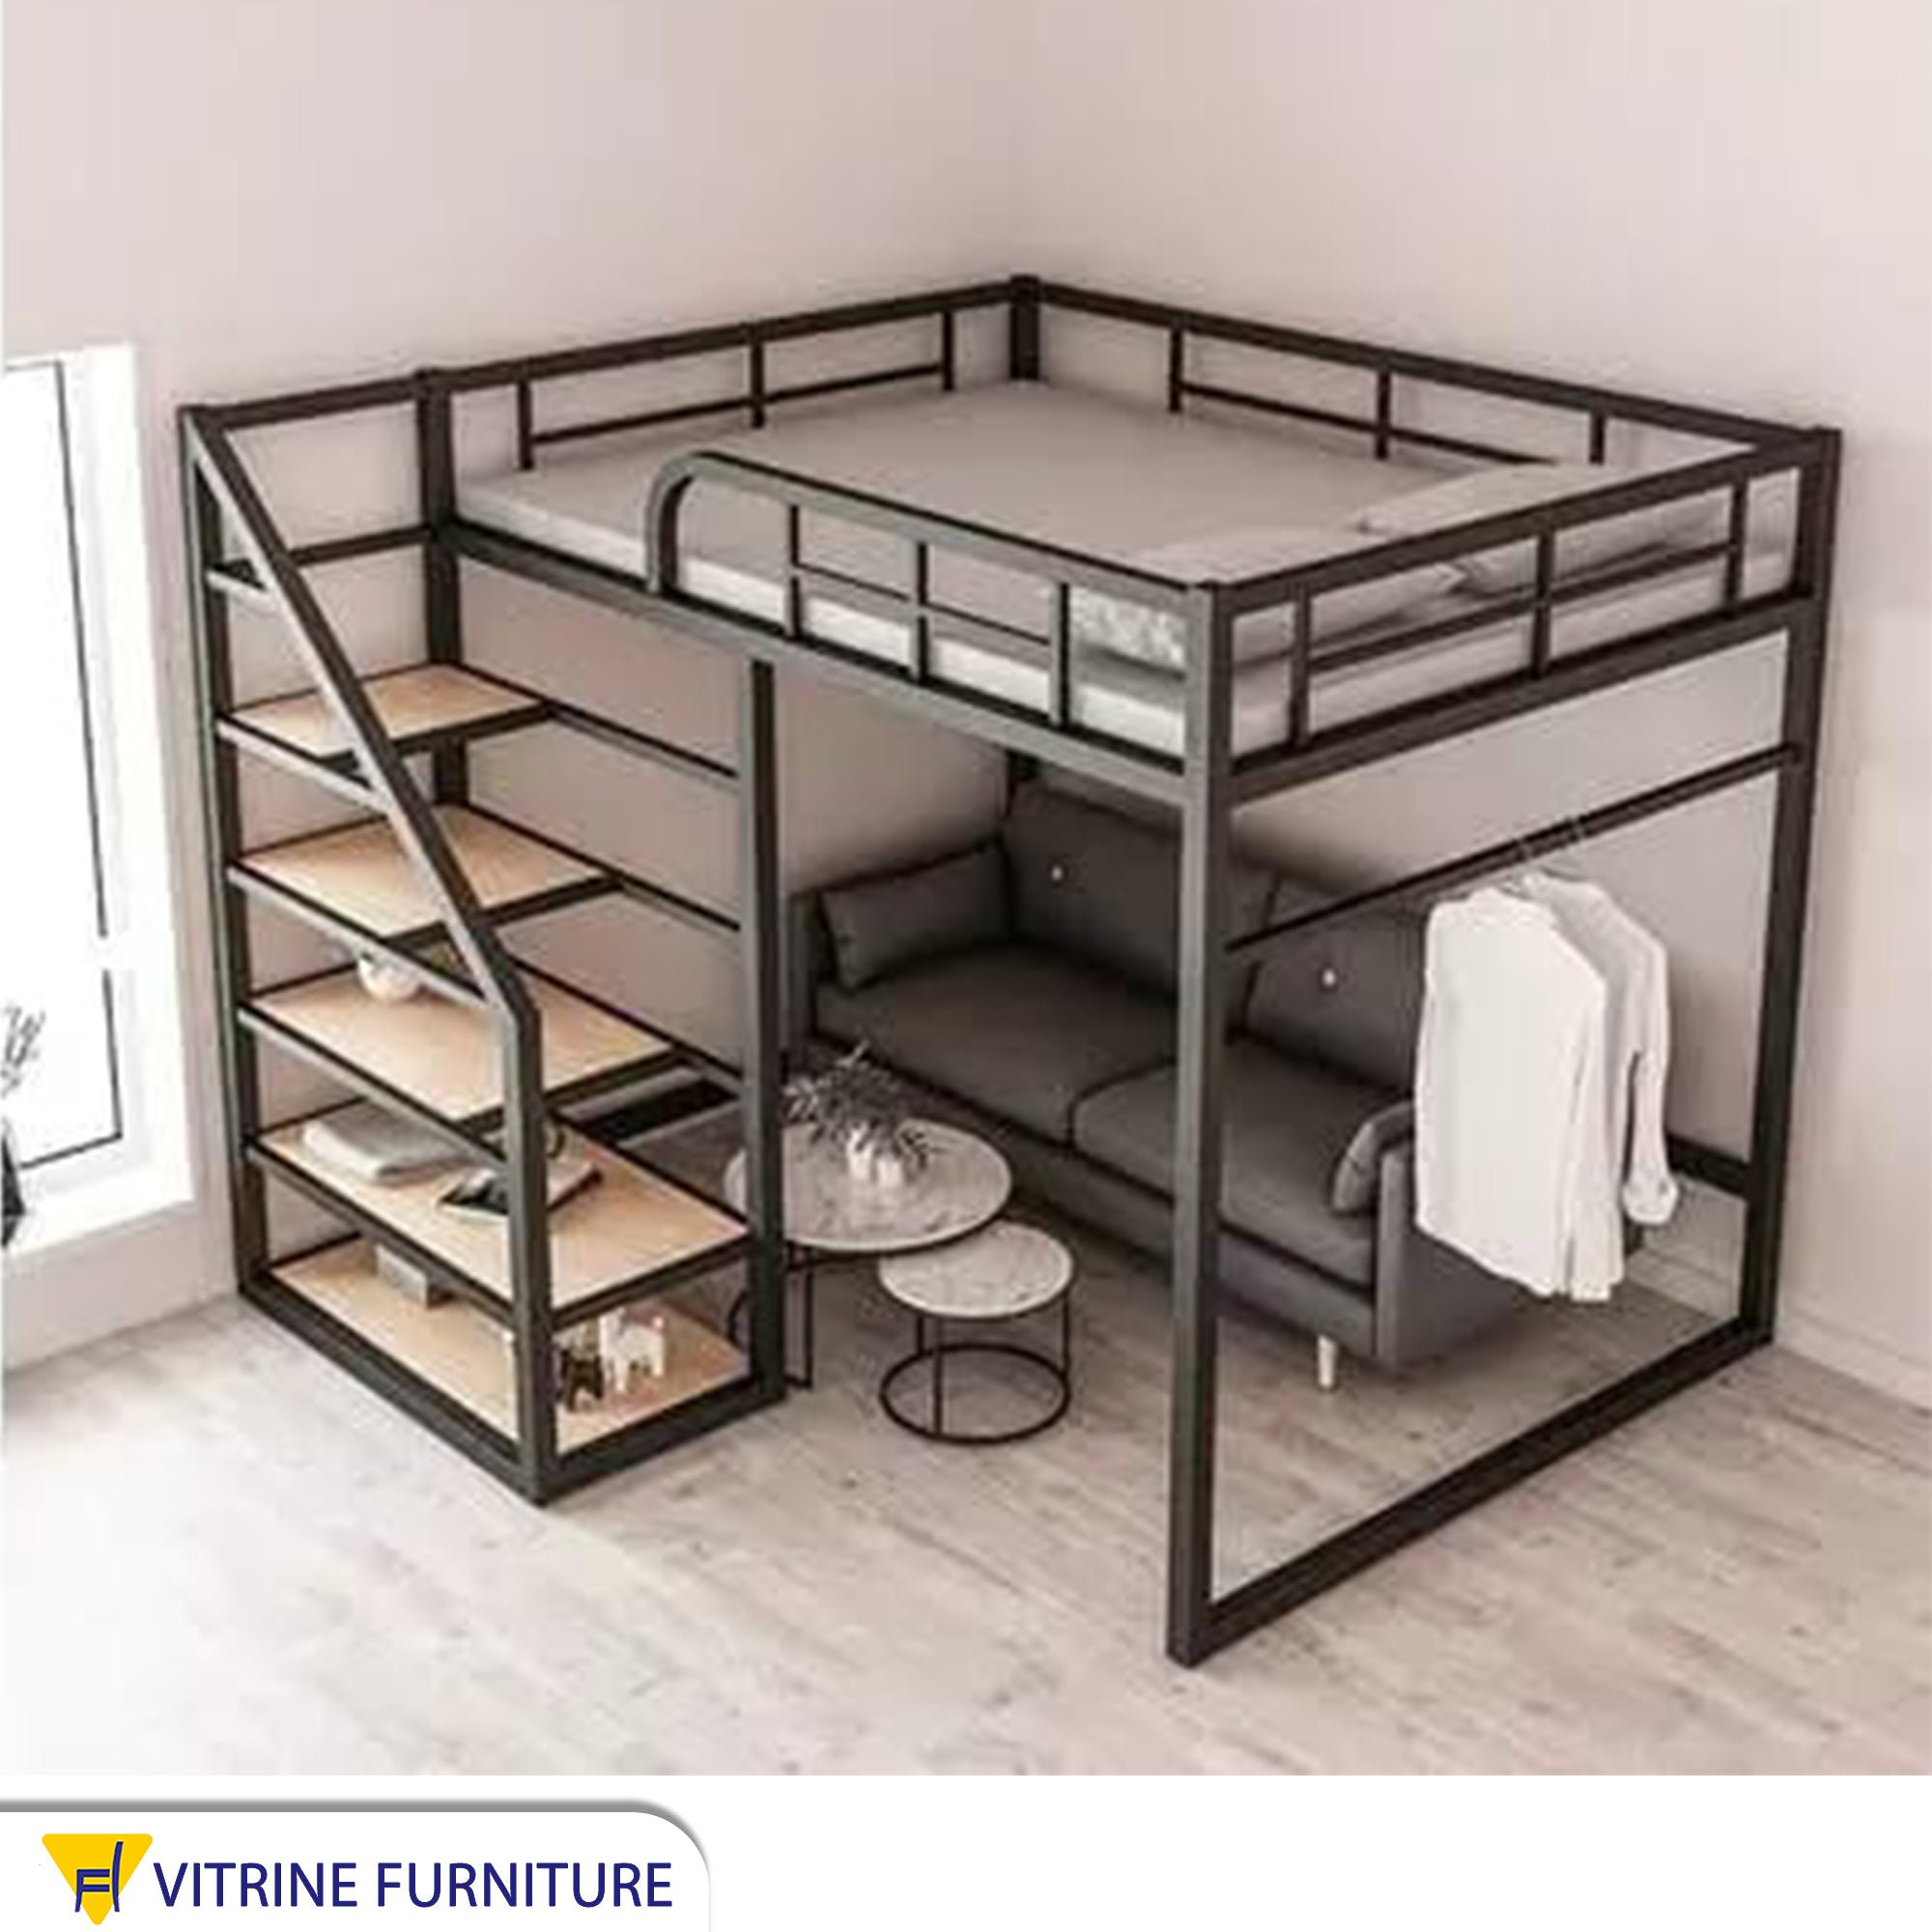 Children s bed with drawer units